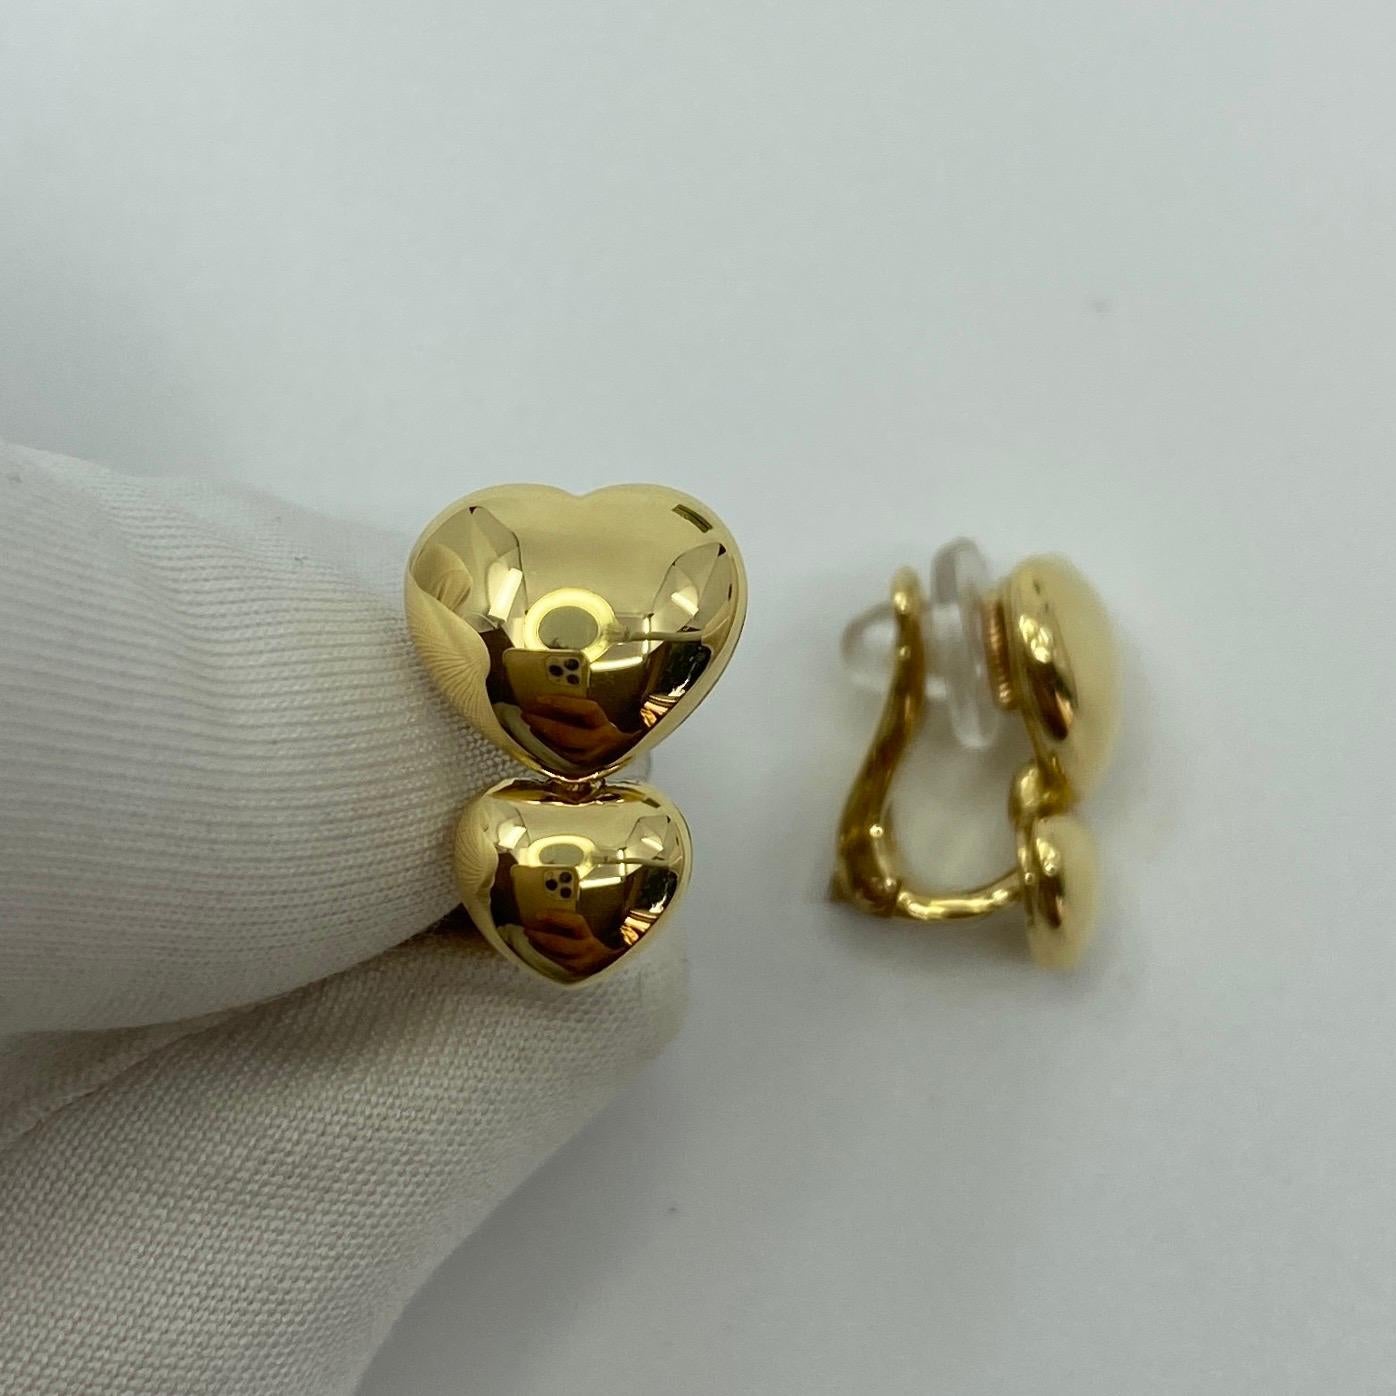 Vintage Van Cleef & Arpels 18k Yellow Gold Double Heart Earrings.

Beautiful earrings featuring two yellow gold domed hearts. Expertly crafted as with all Van Cleef & Arpels jewellery.
Fitted with secure and comfortable clip-on fastening.

Each